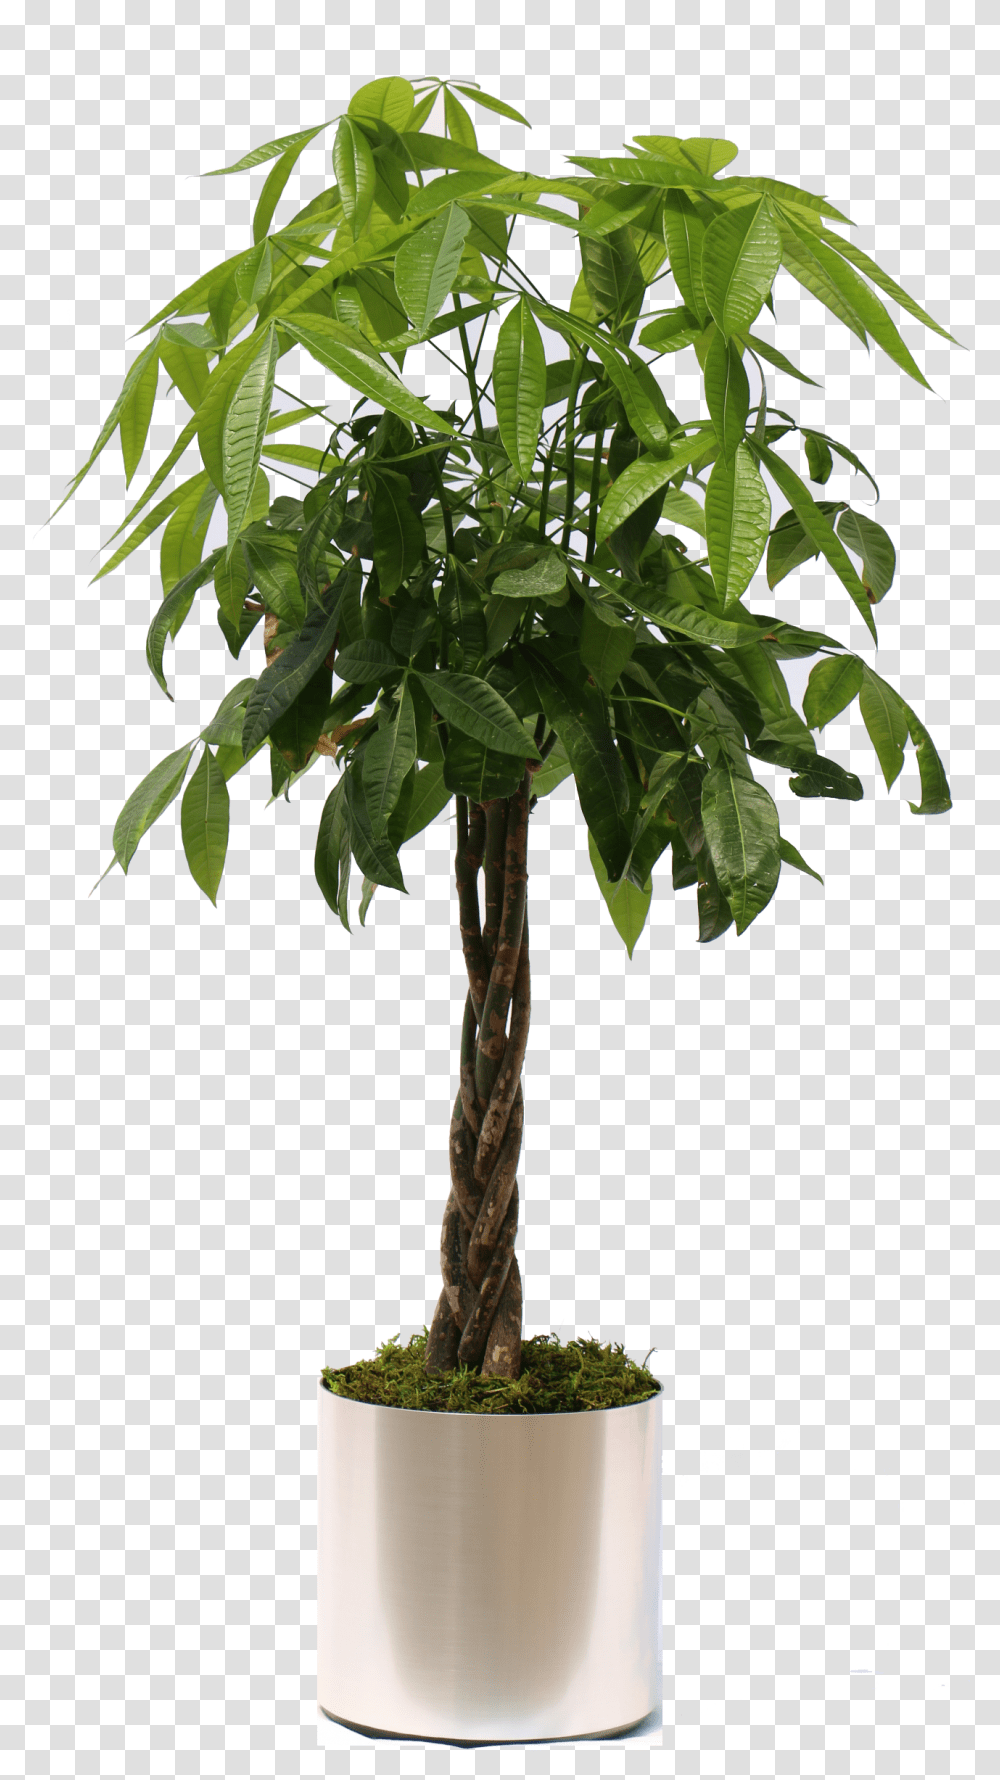 Download Hd Potted Tropical Plants Money Tree Plant, Leaf, Palm Tree, Arecaceae, Tree Trunk Transparent Png